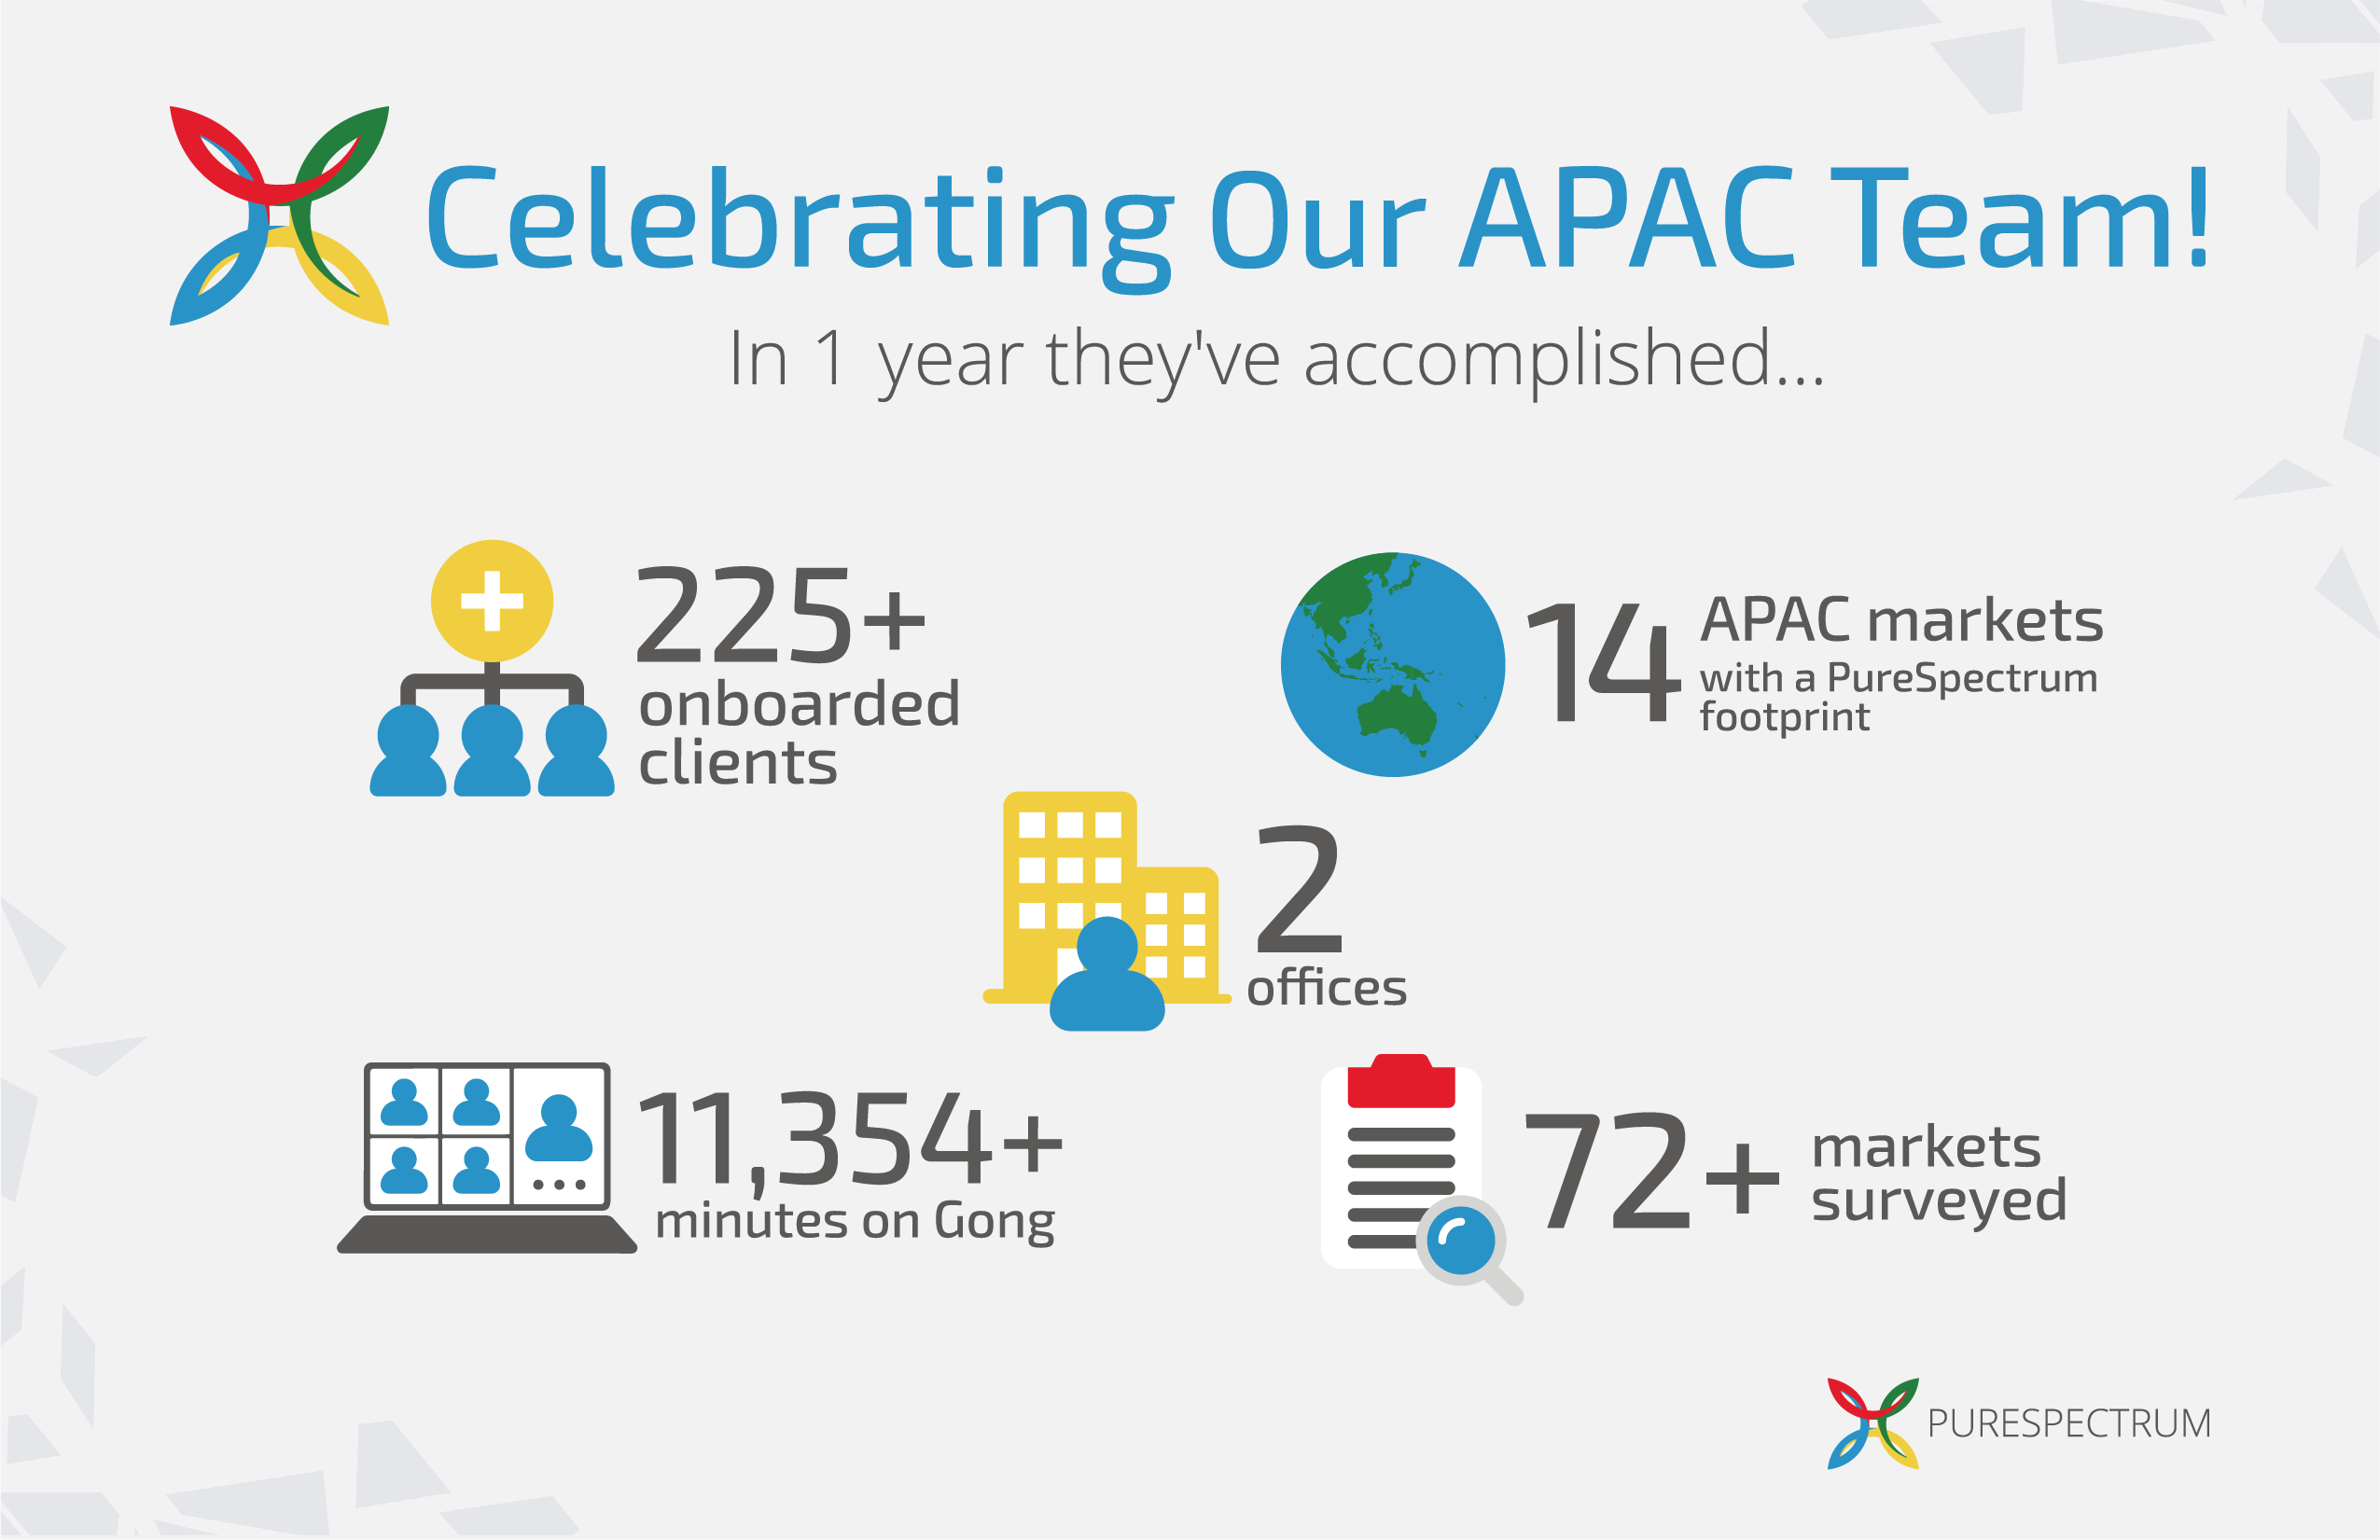 infographic showing the accomplishments of the PureSpectrum APAC team